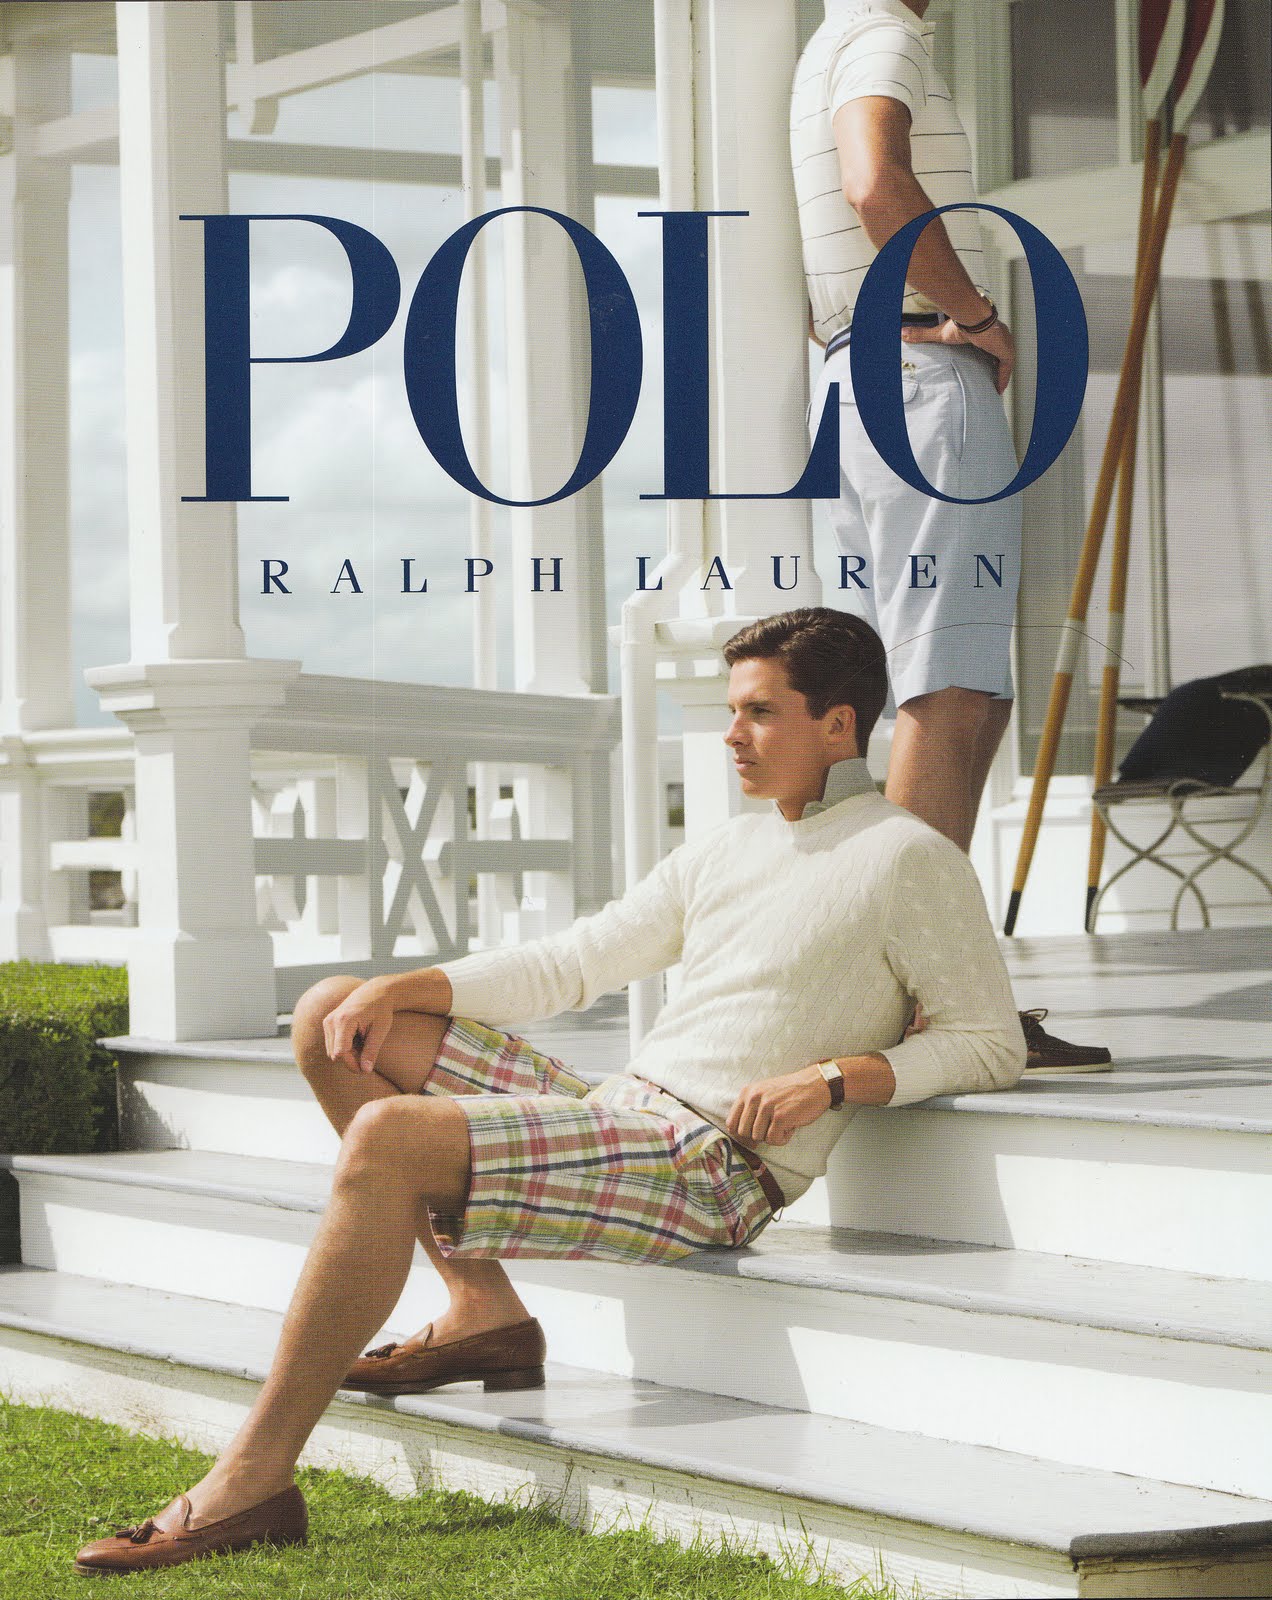 Fantasy Island: A Gallery Of Polo RL Marketing Images